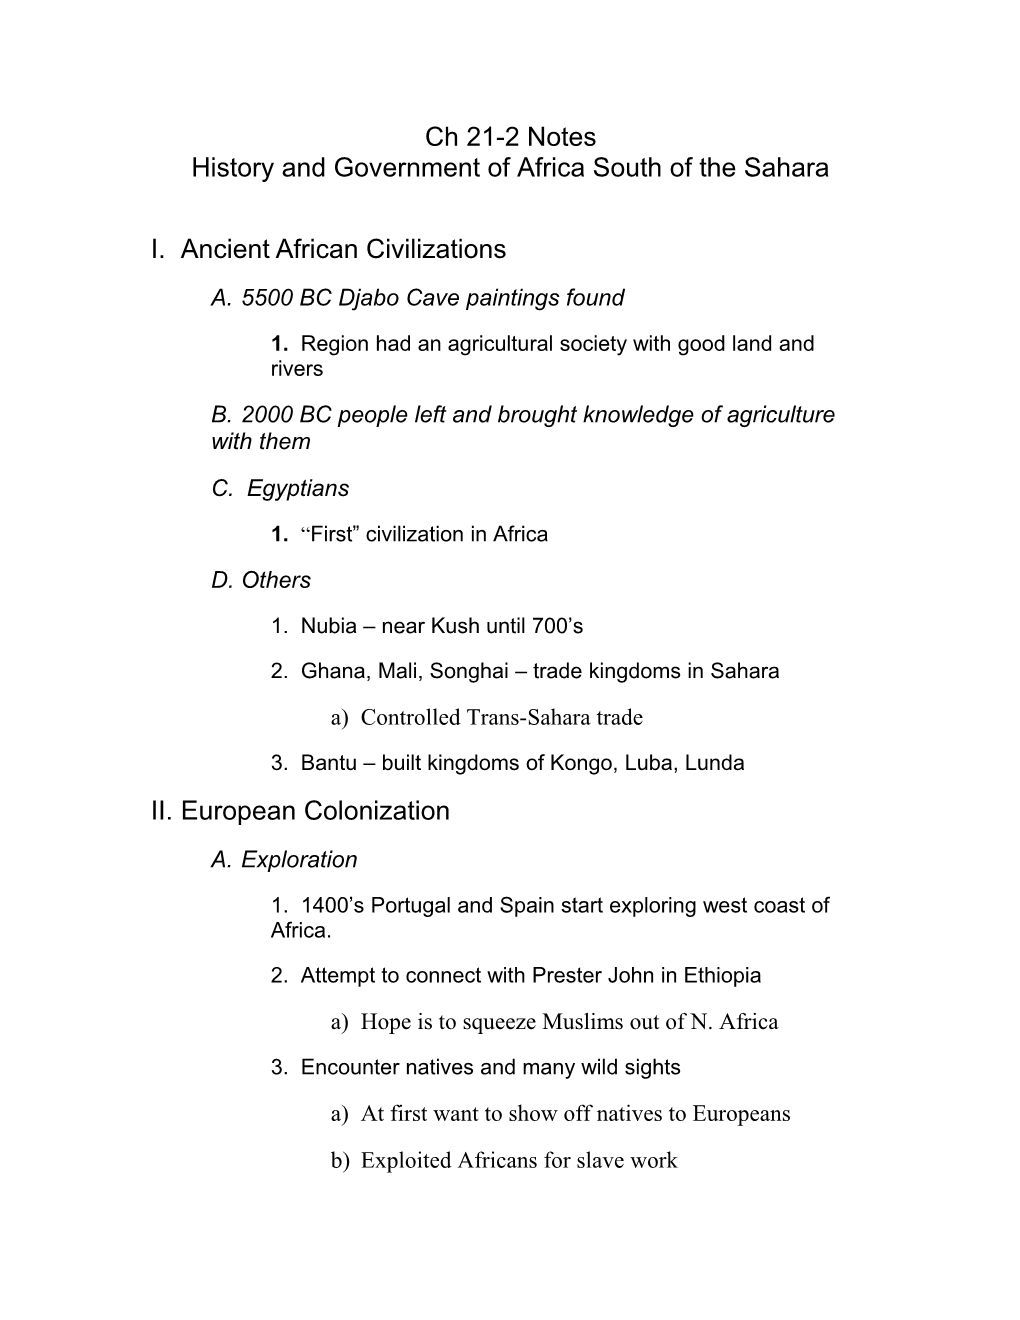 History and Government of Africa South of the Sahara